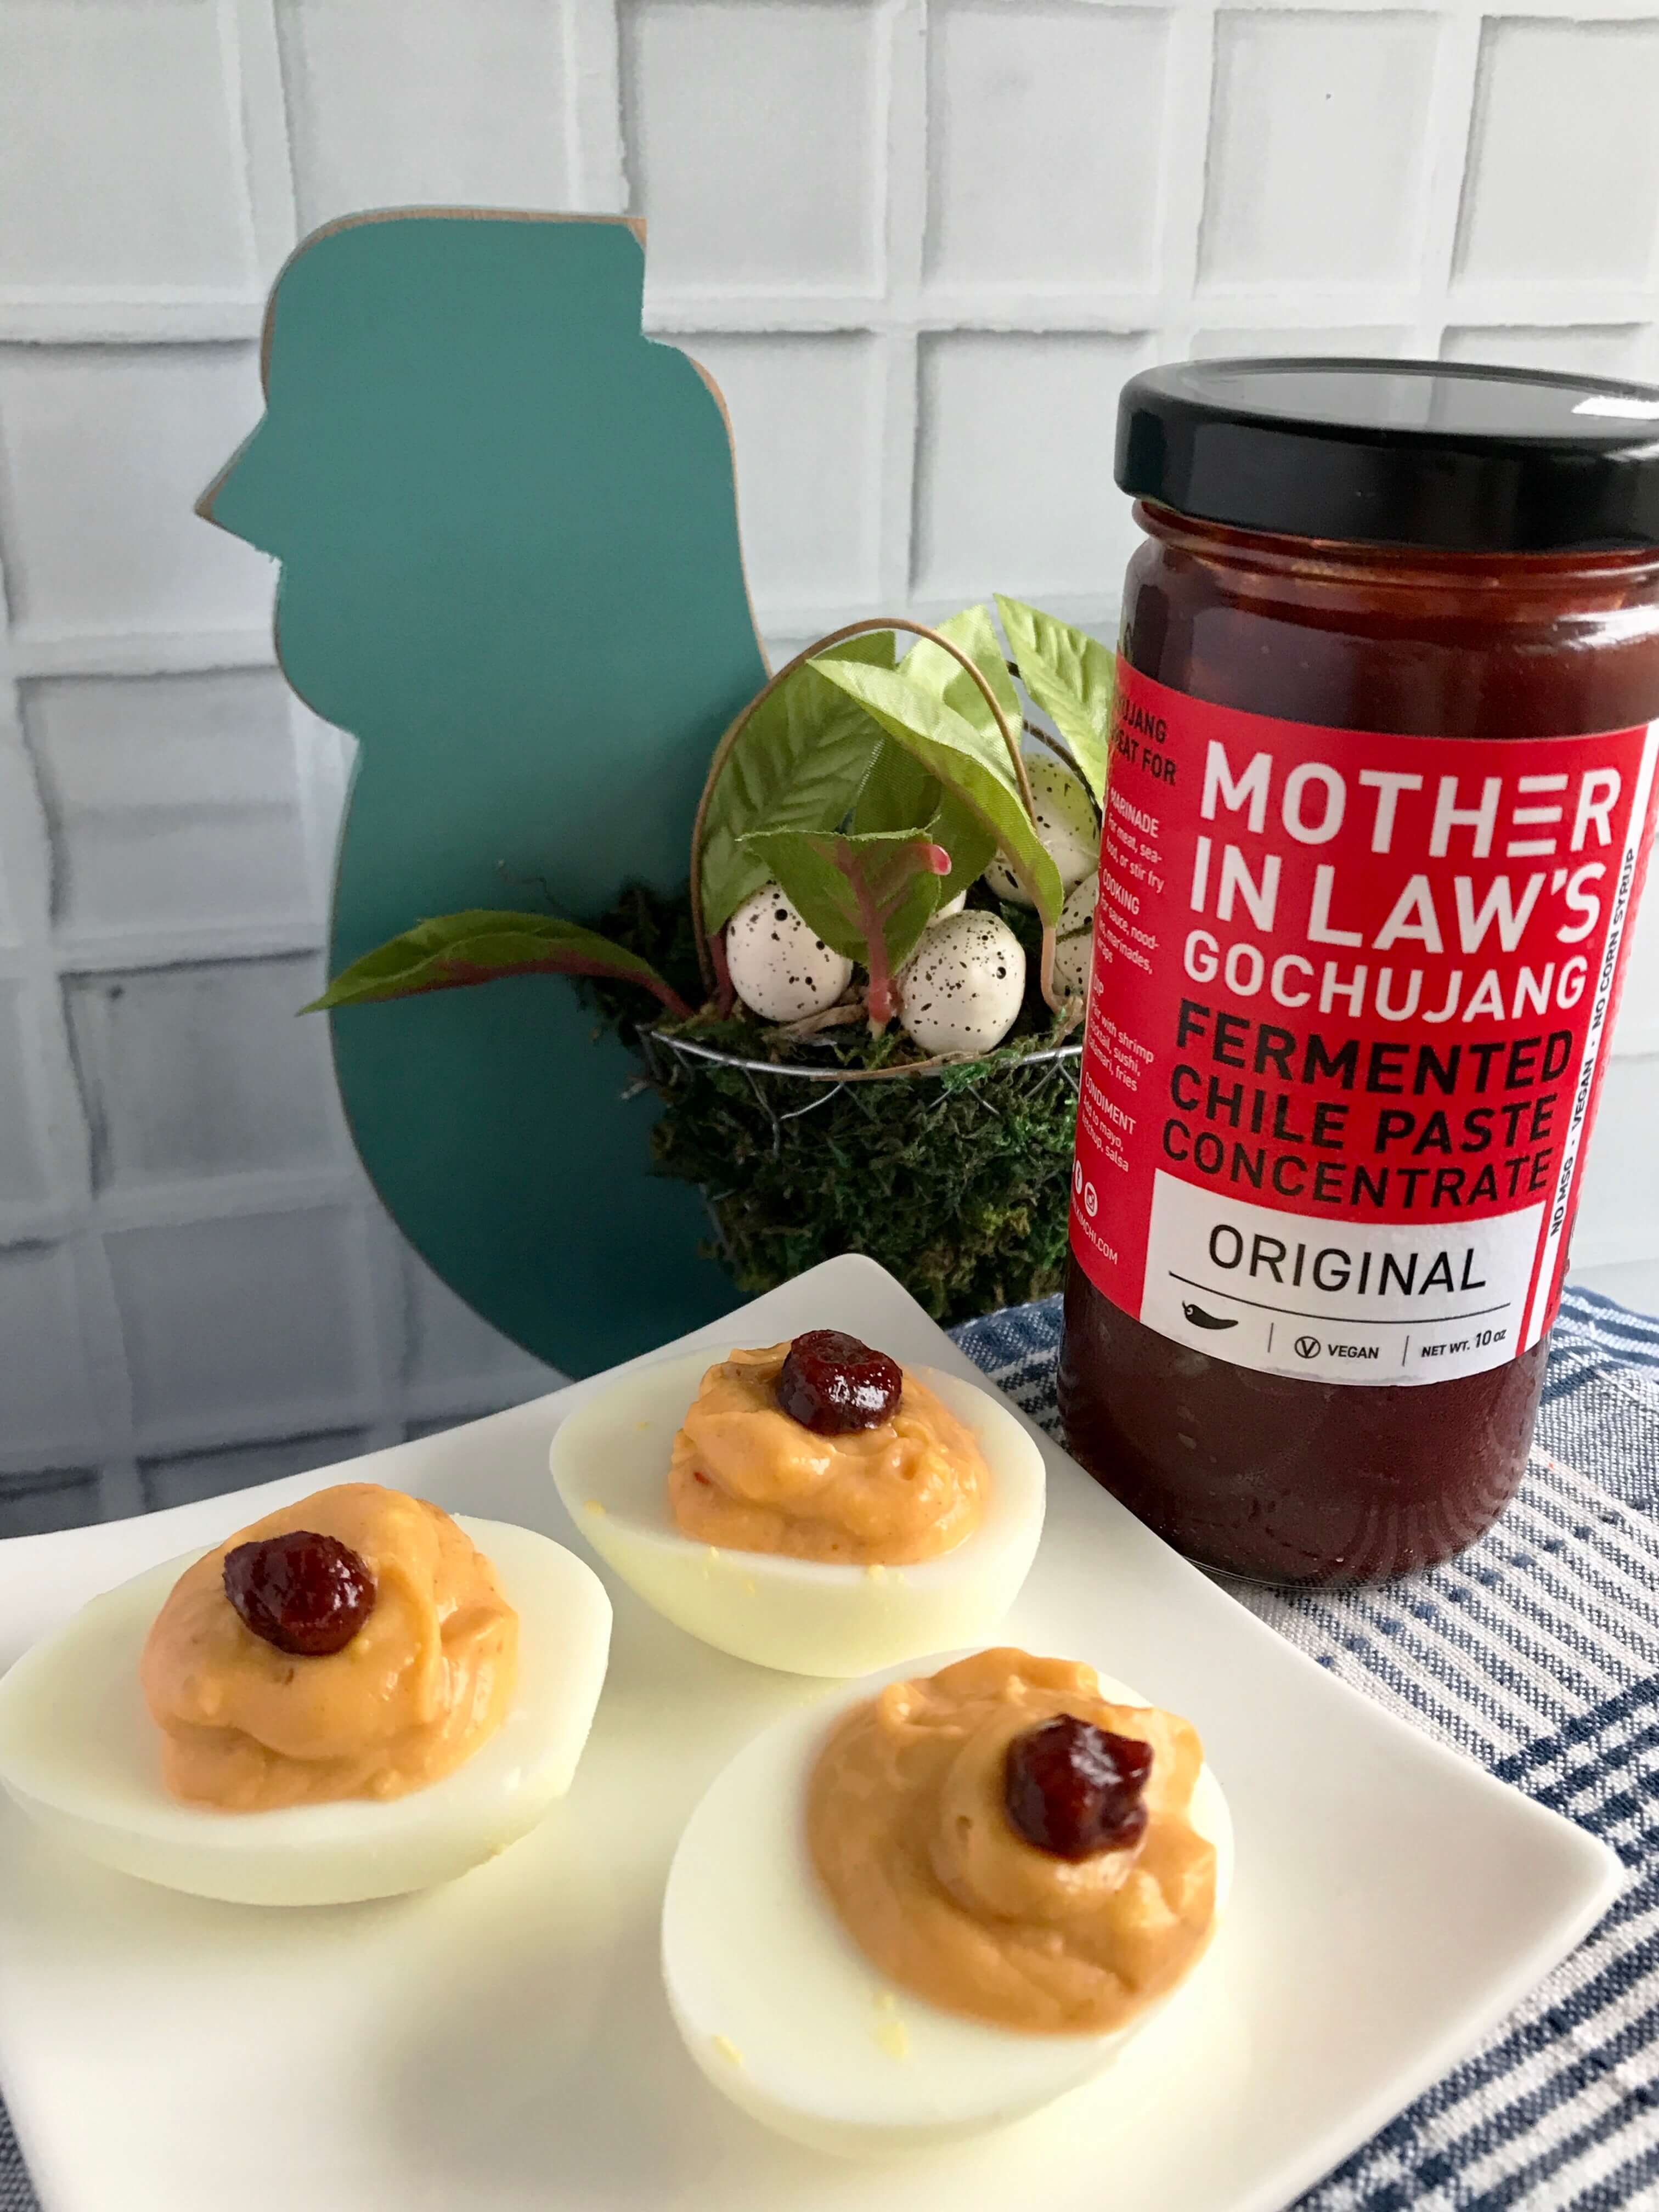 Sweet & Spicy Thai Chili Deviled Eggs with Gochujang | Spicy Deviled Eggs Recipe | Easter Hardboiled Egg Leftovers | Nutrition Nuptials | Mandy Enright MS RDN RYT